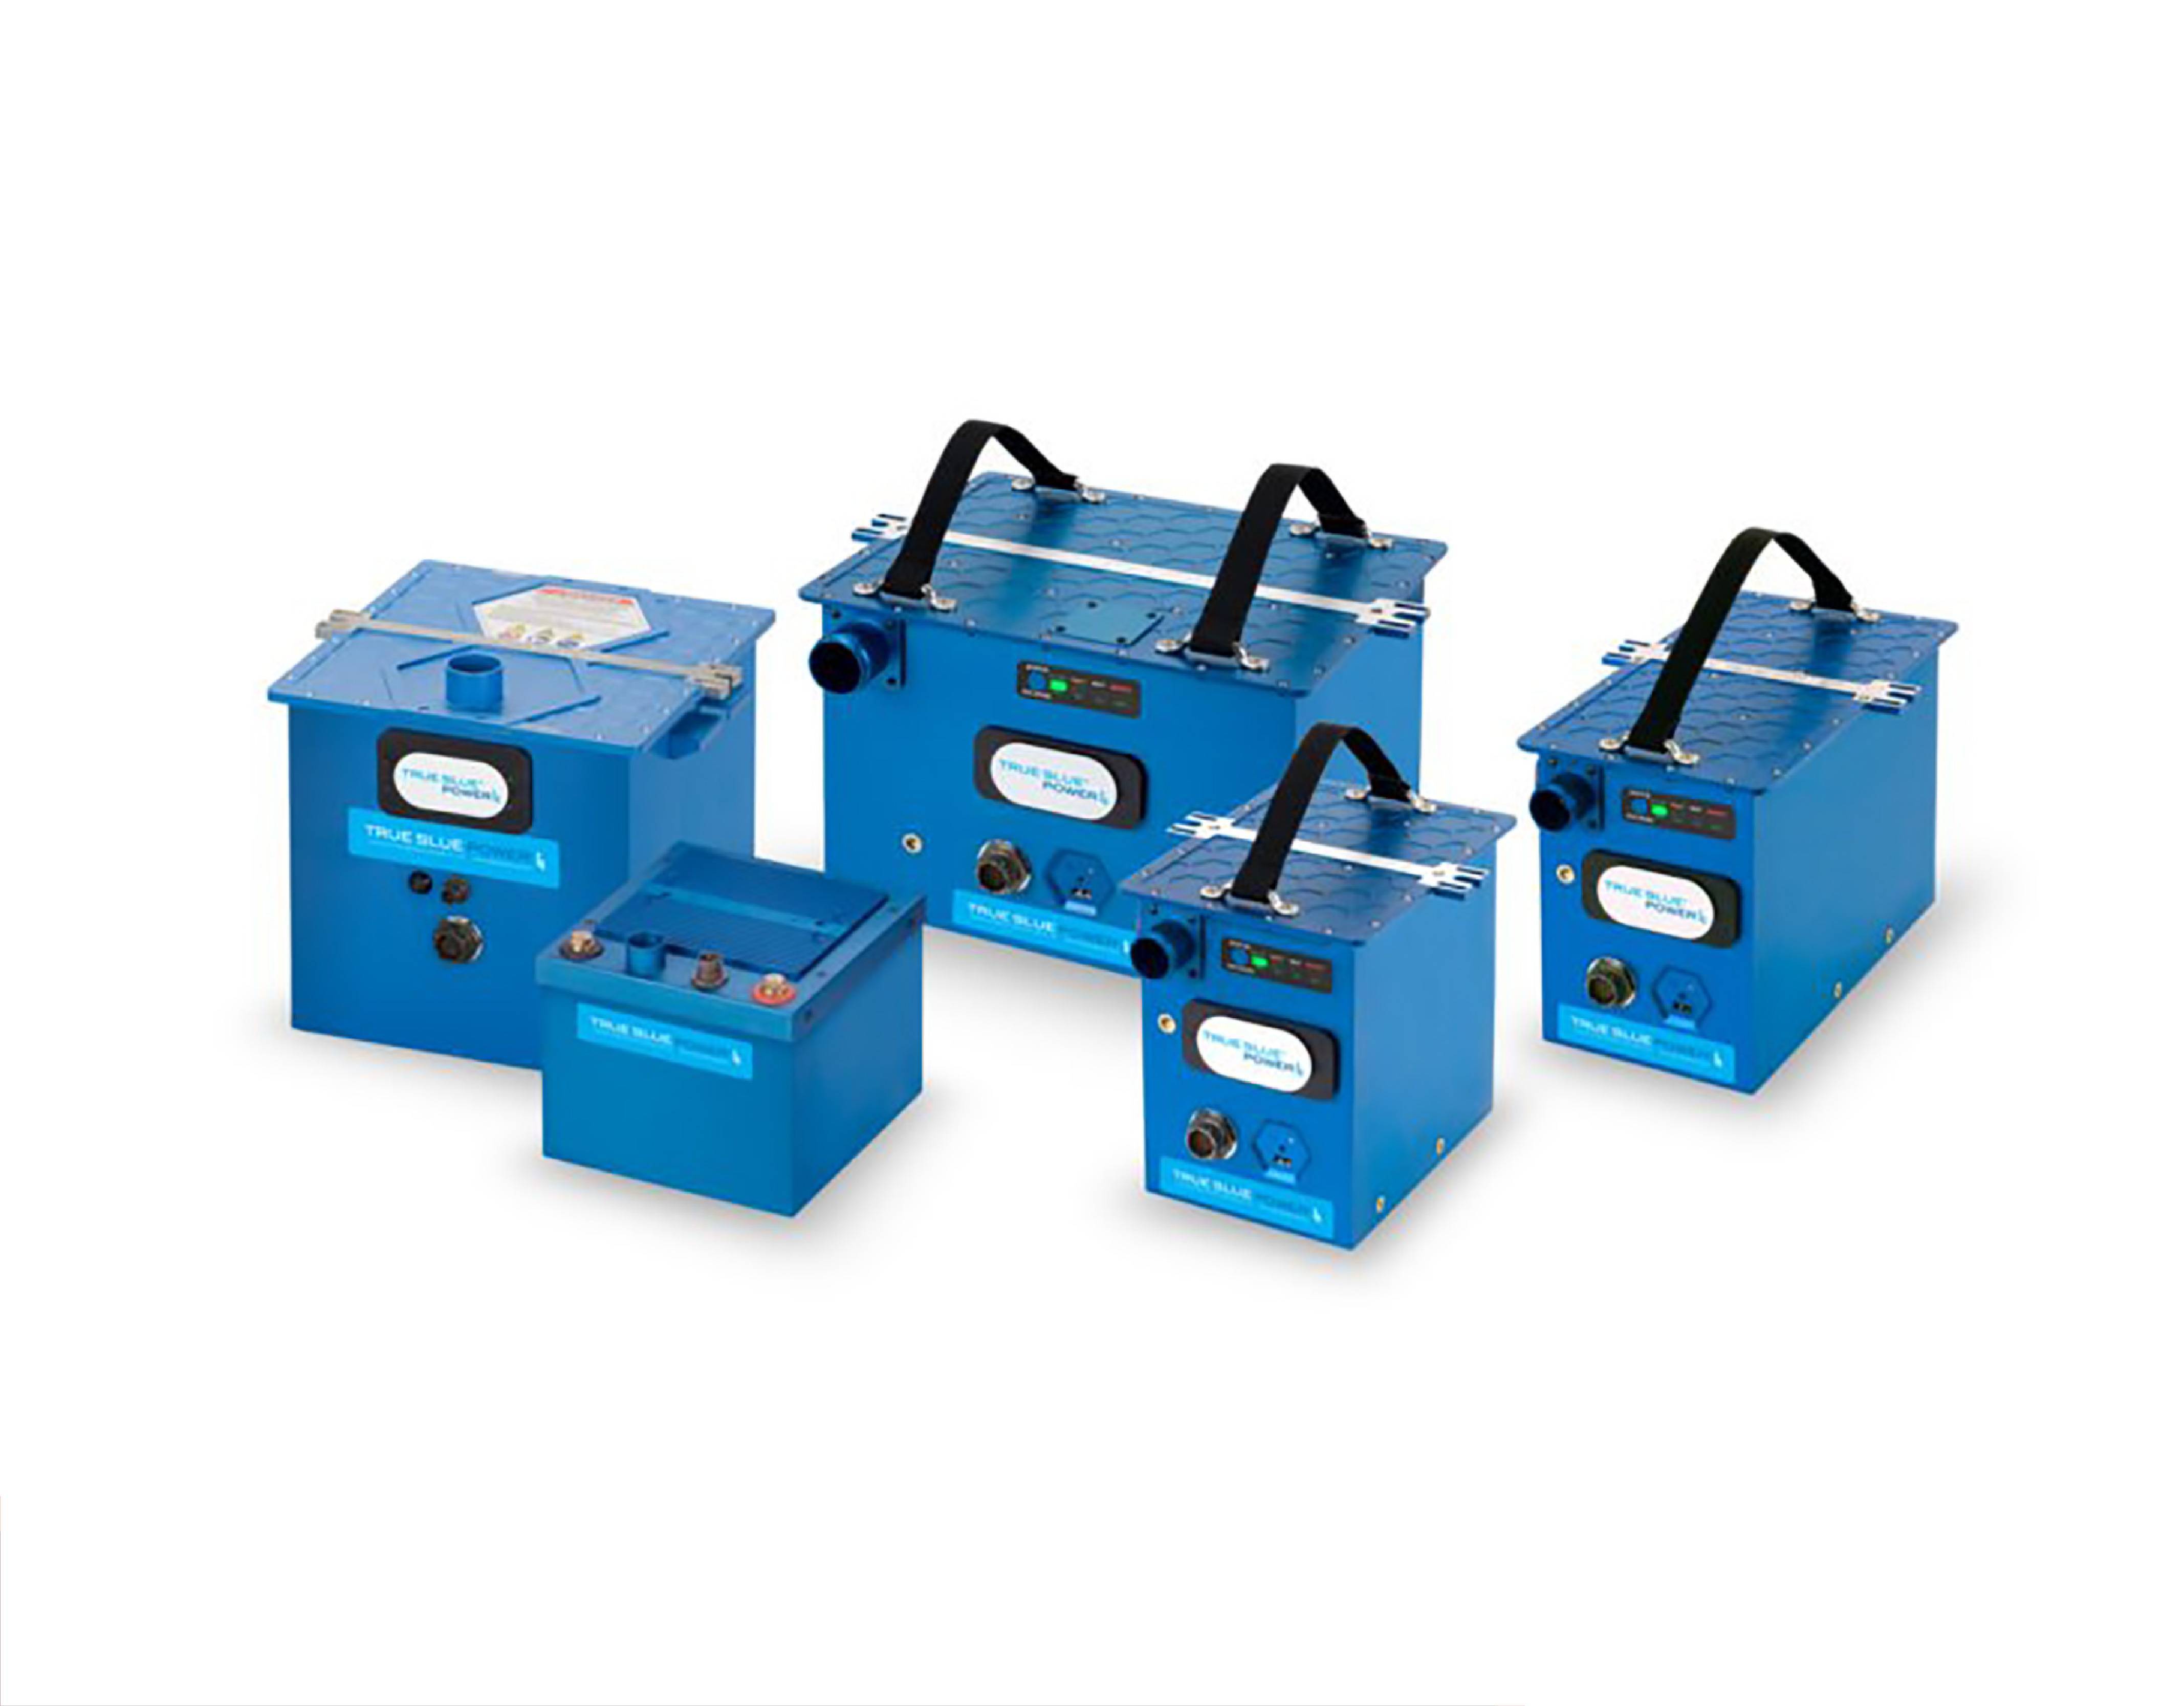 Airwolf’s lithium-ion battery STC kits include a state-of-the-art True Blue Power lithium-ion main ship battery, mounting hardware, simple wiring harness and a magic button that is exclusive to Airwolf. True Blue Power Photo